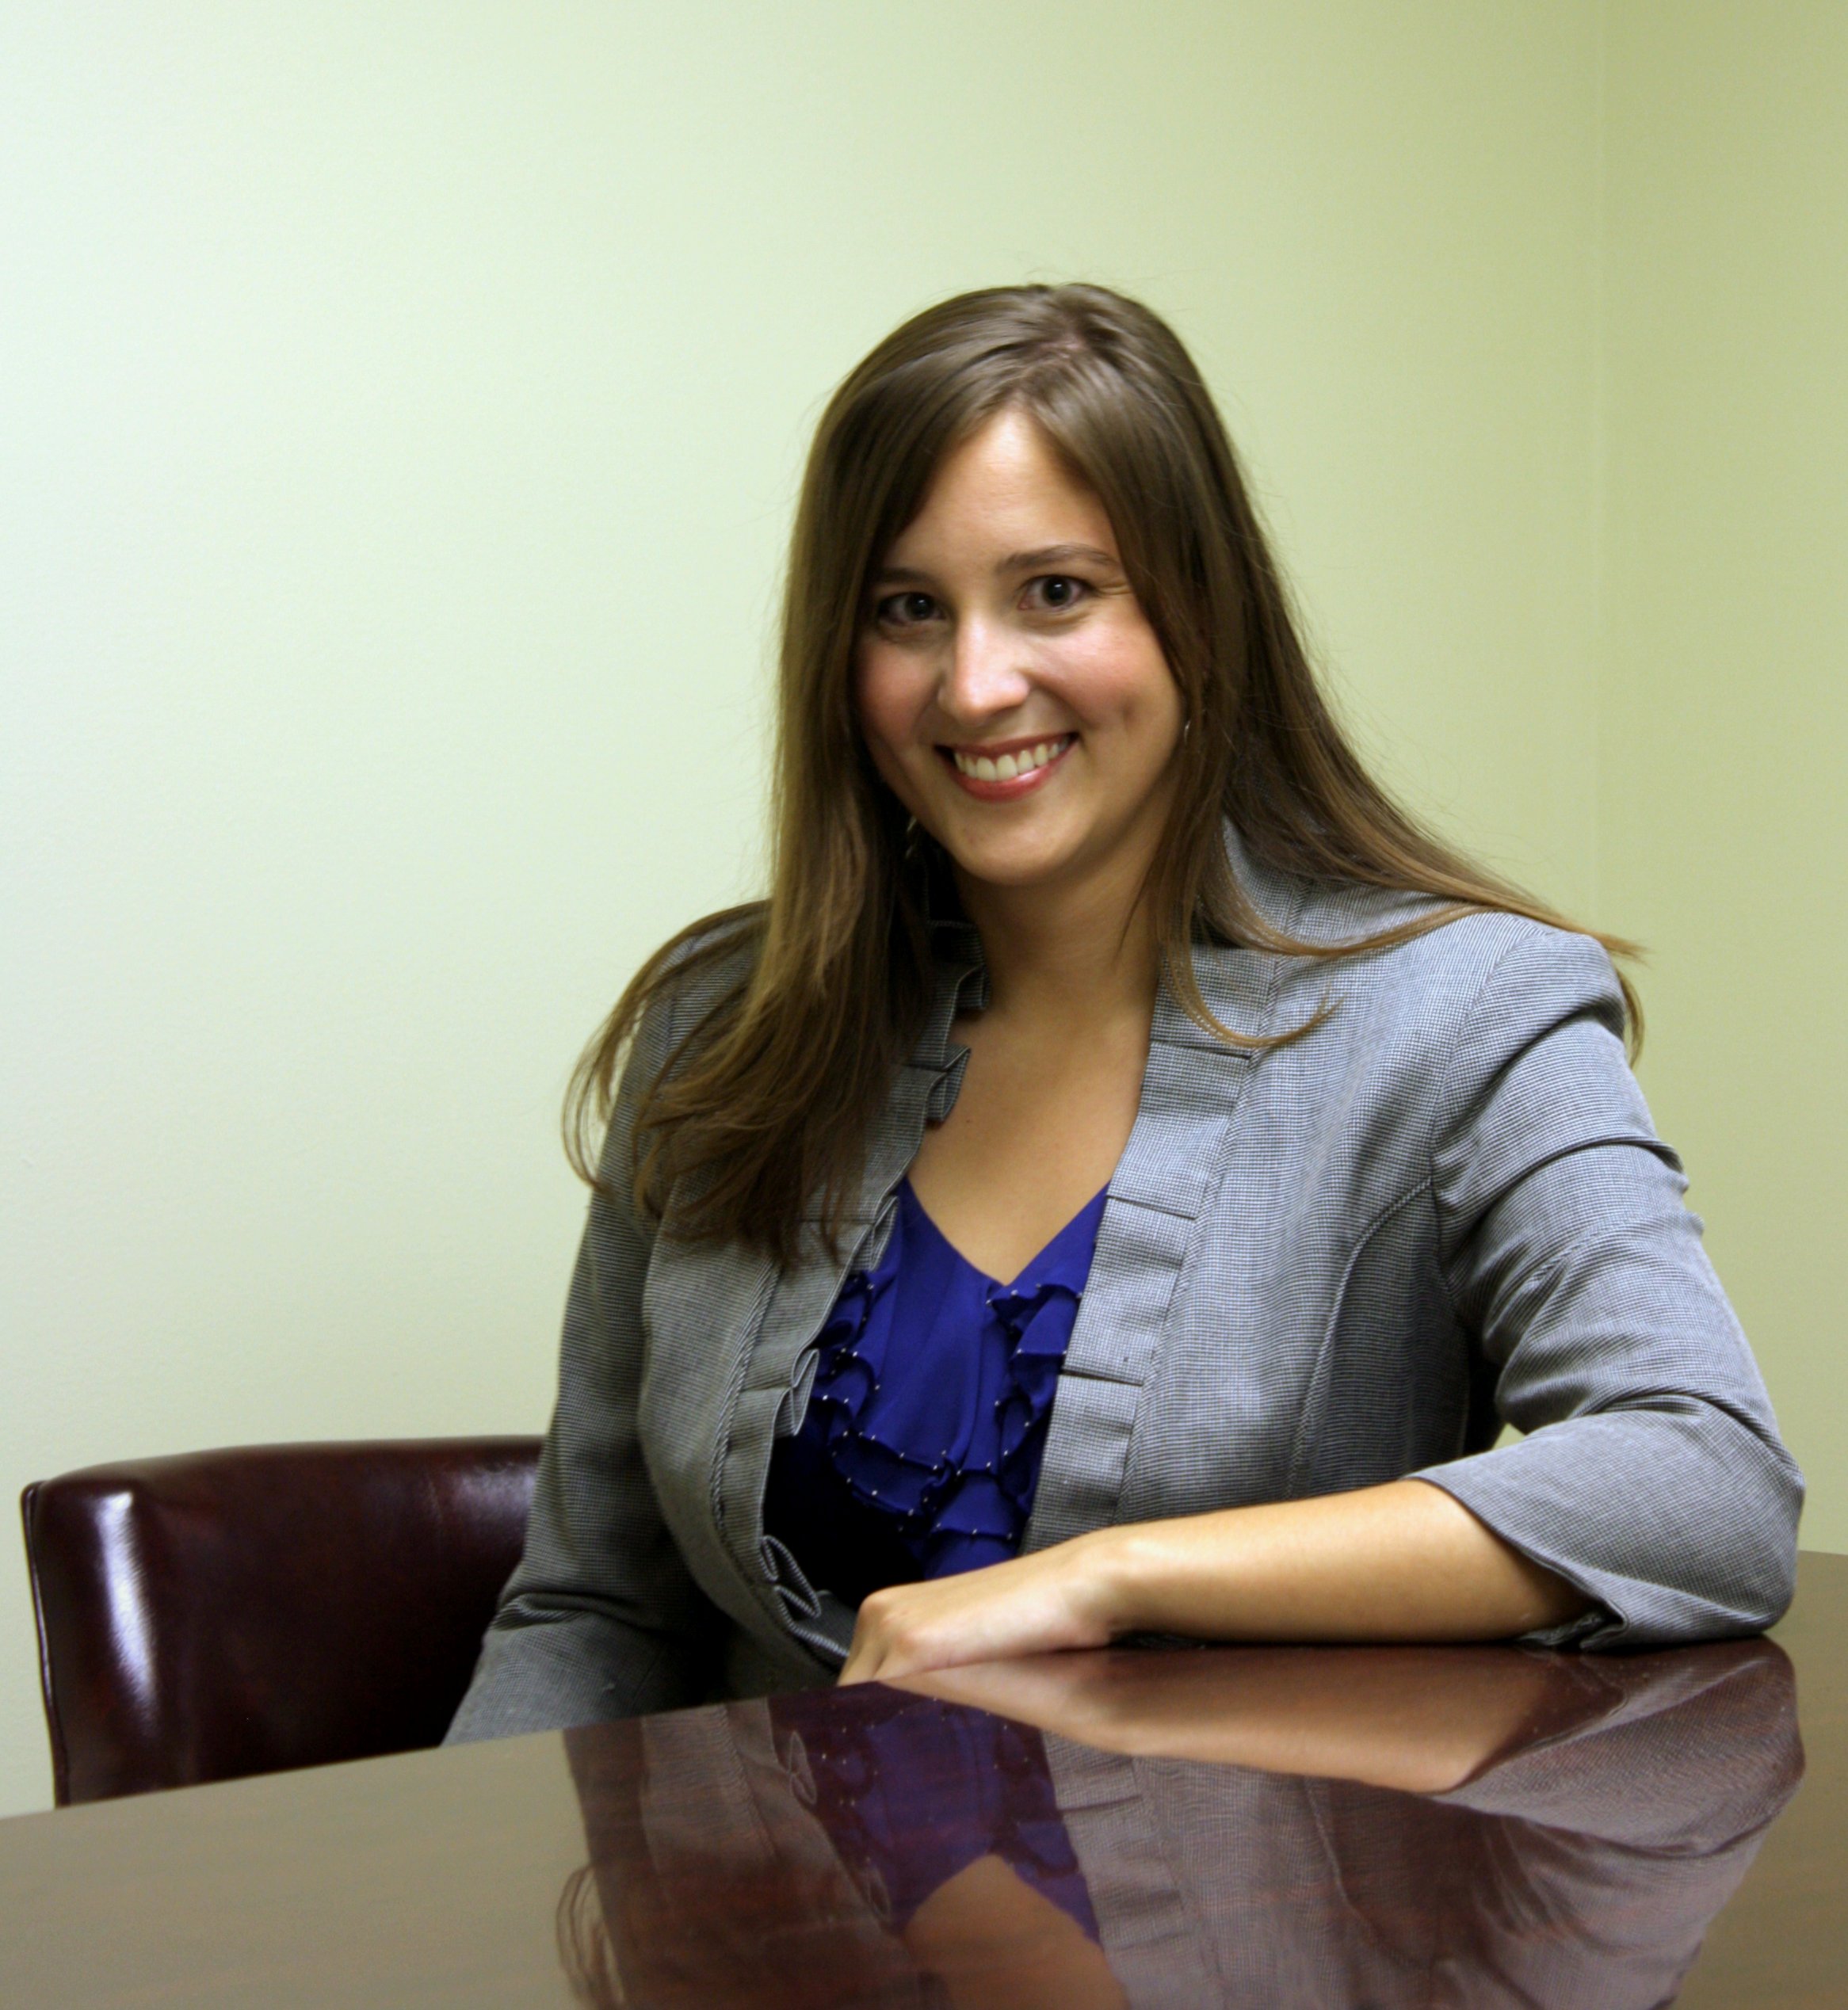 Alyssa Baxley, an attorney-at-law with Baxley Maniscalco, sits at a desk posing for a photo.